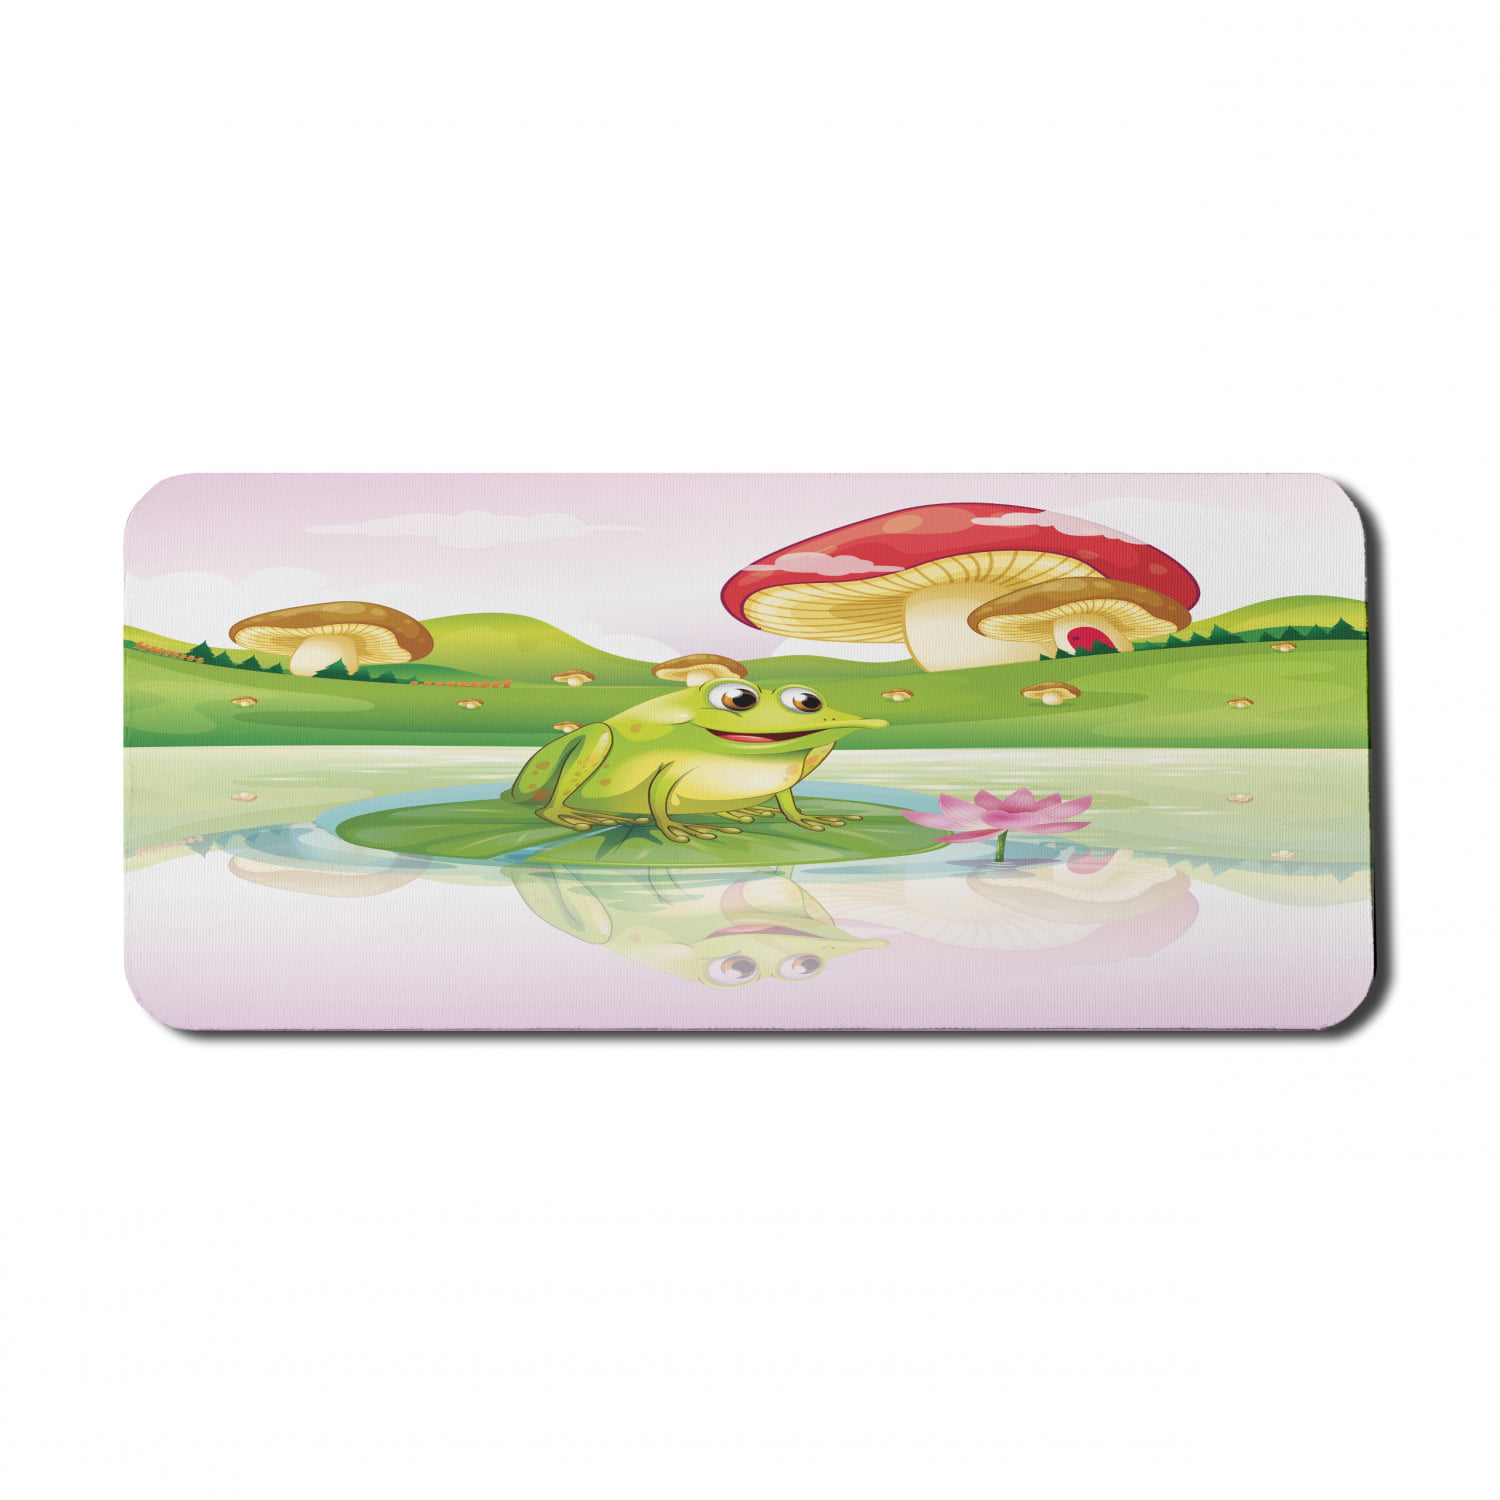 FROG LAYING ON LILLY PAD SET OF 4 RUBBER BACKED COASTERS W/ FABRIC TOP 